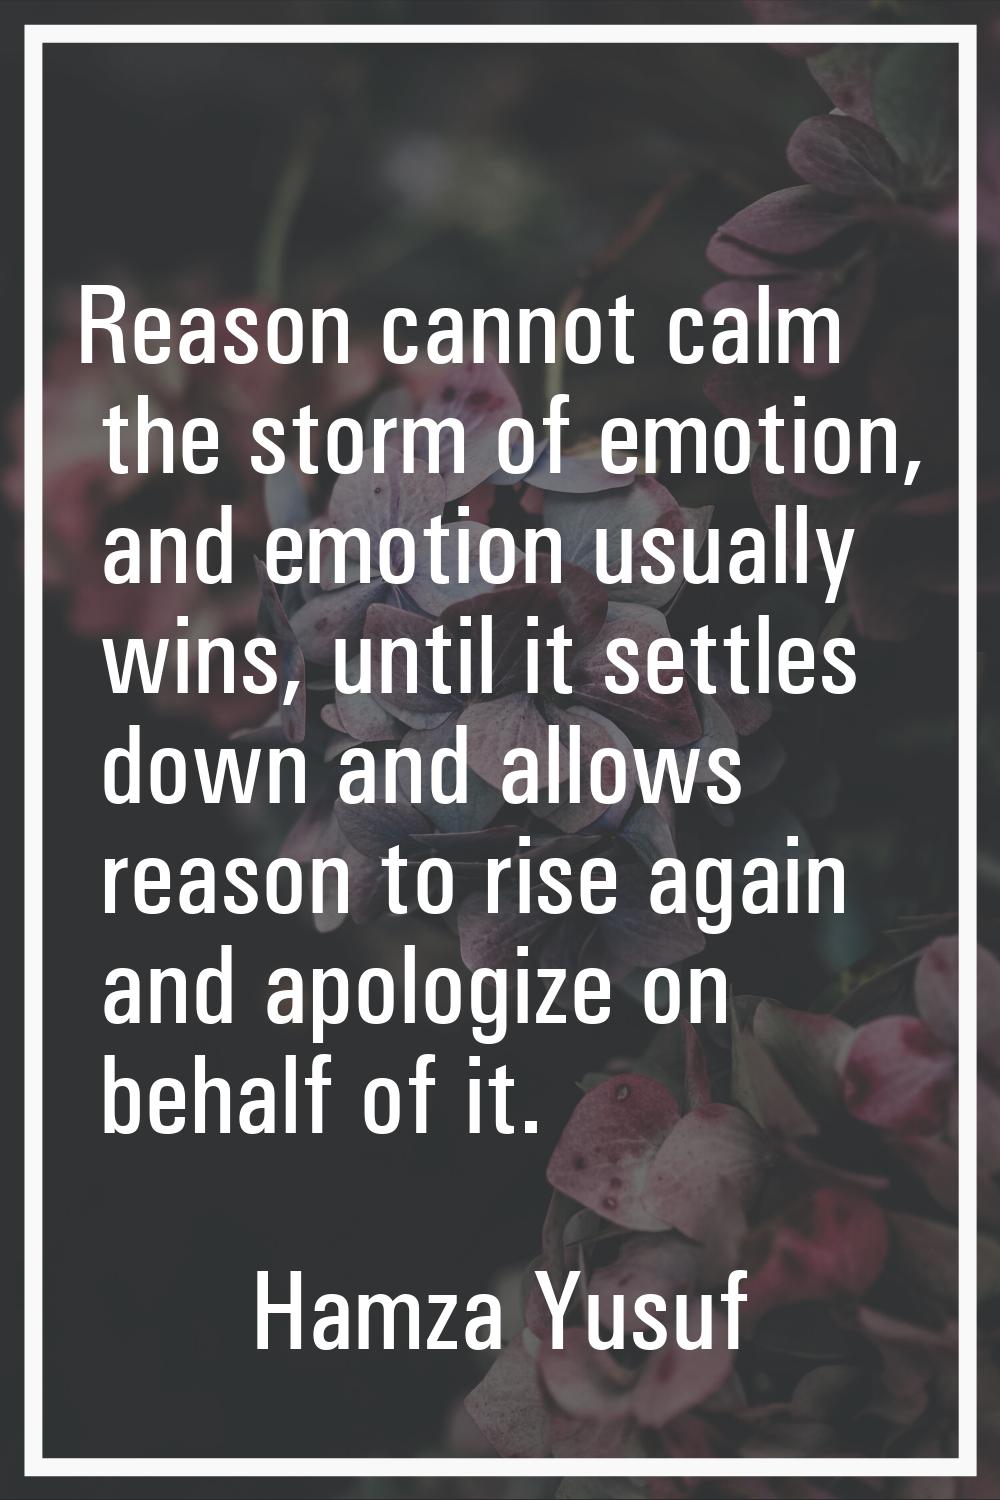 Reason cannot calm the storm of emotion, and emotion usually wins, until it settles down and allows